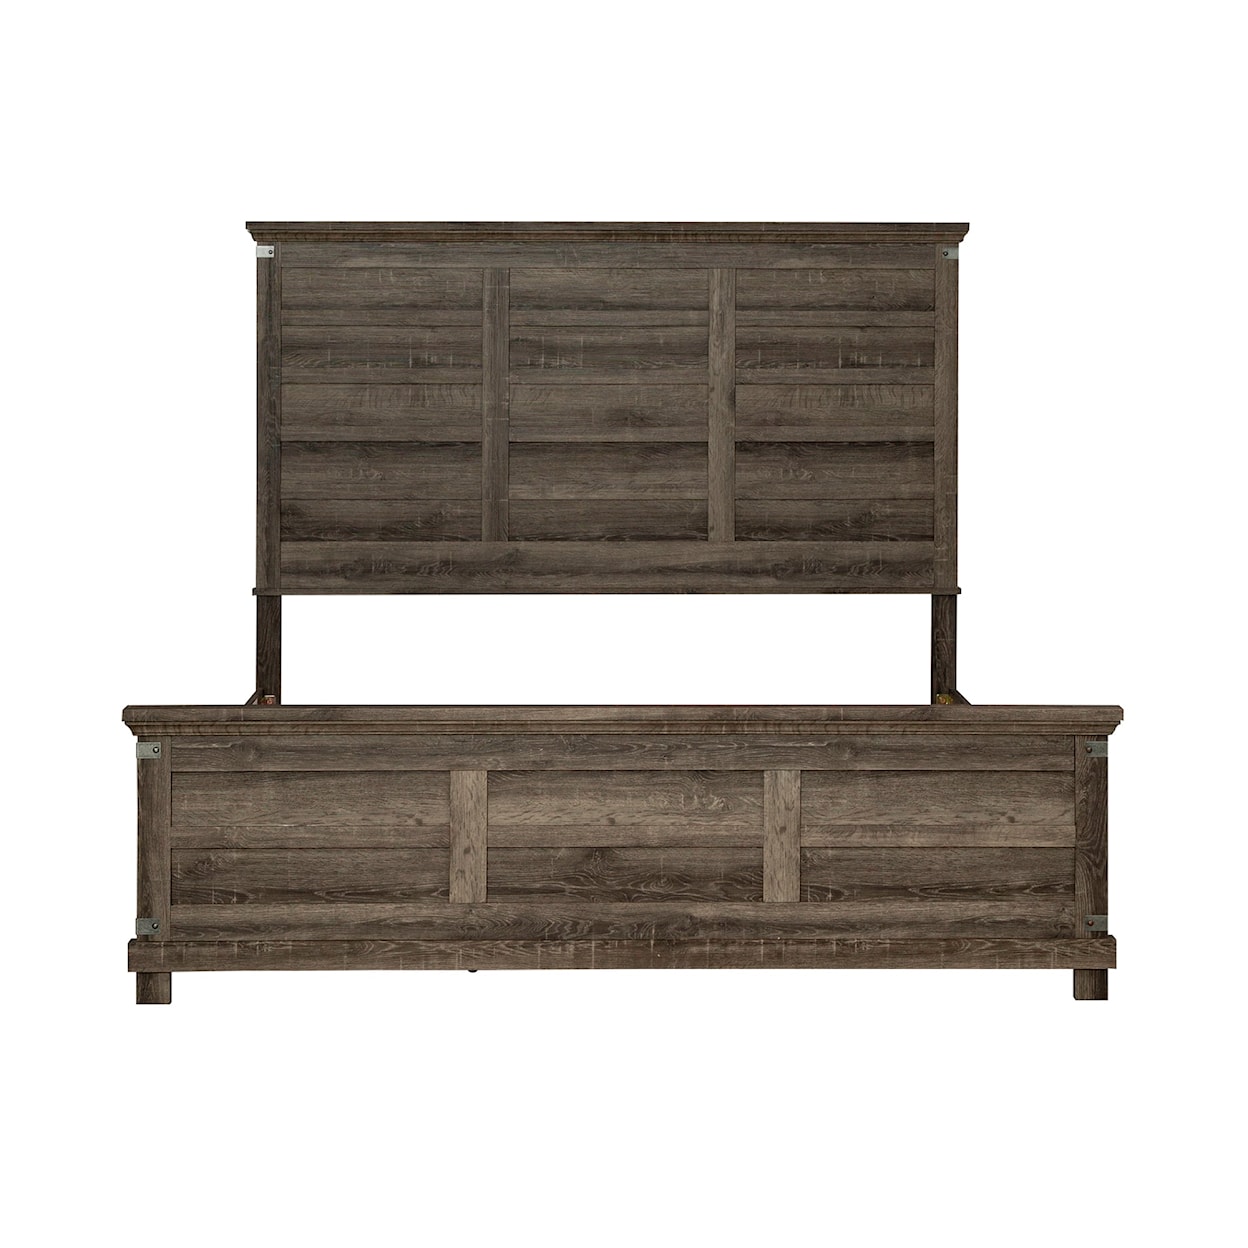 Liberty Furniture Lakeside Haven Queen Panel Bed